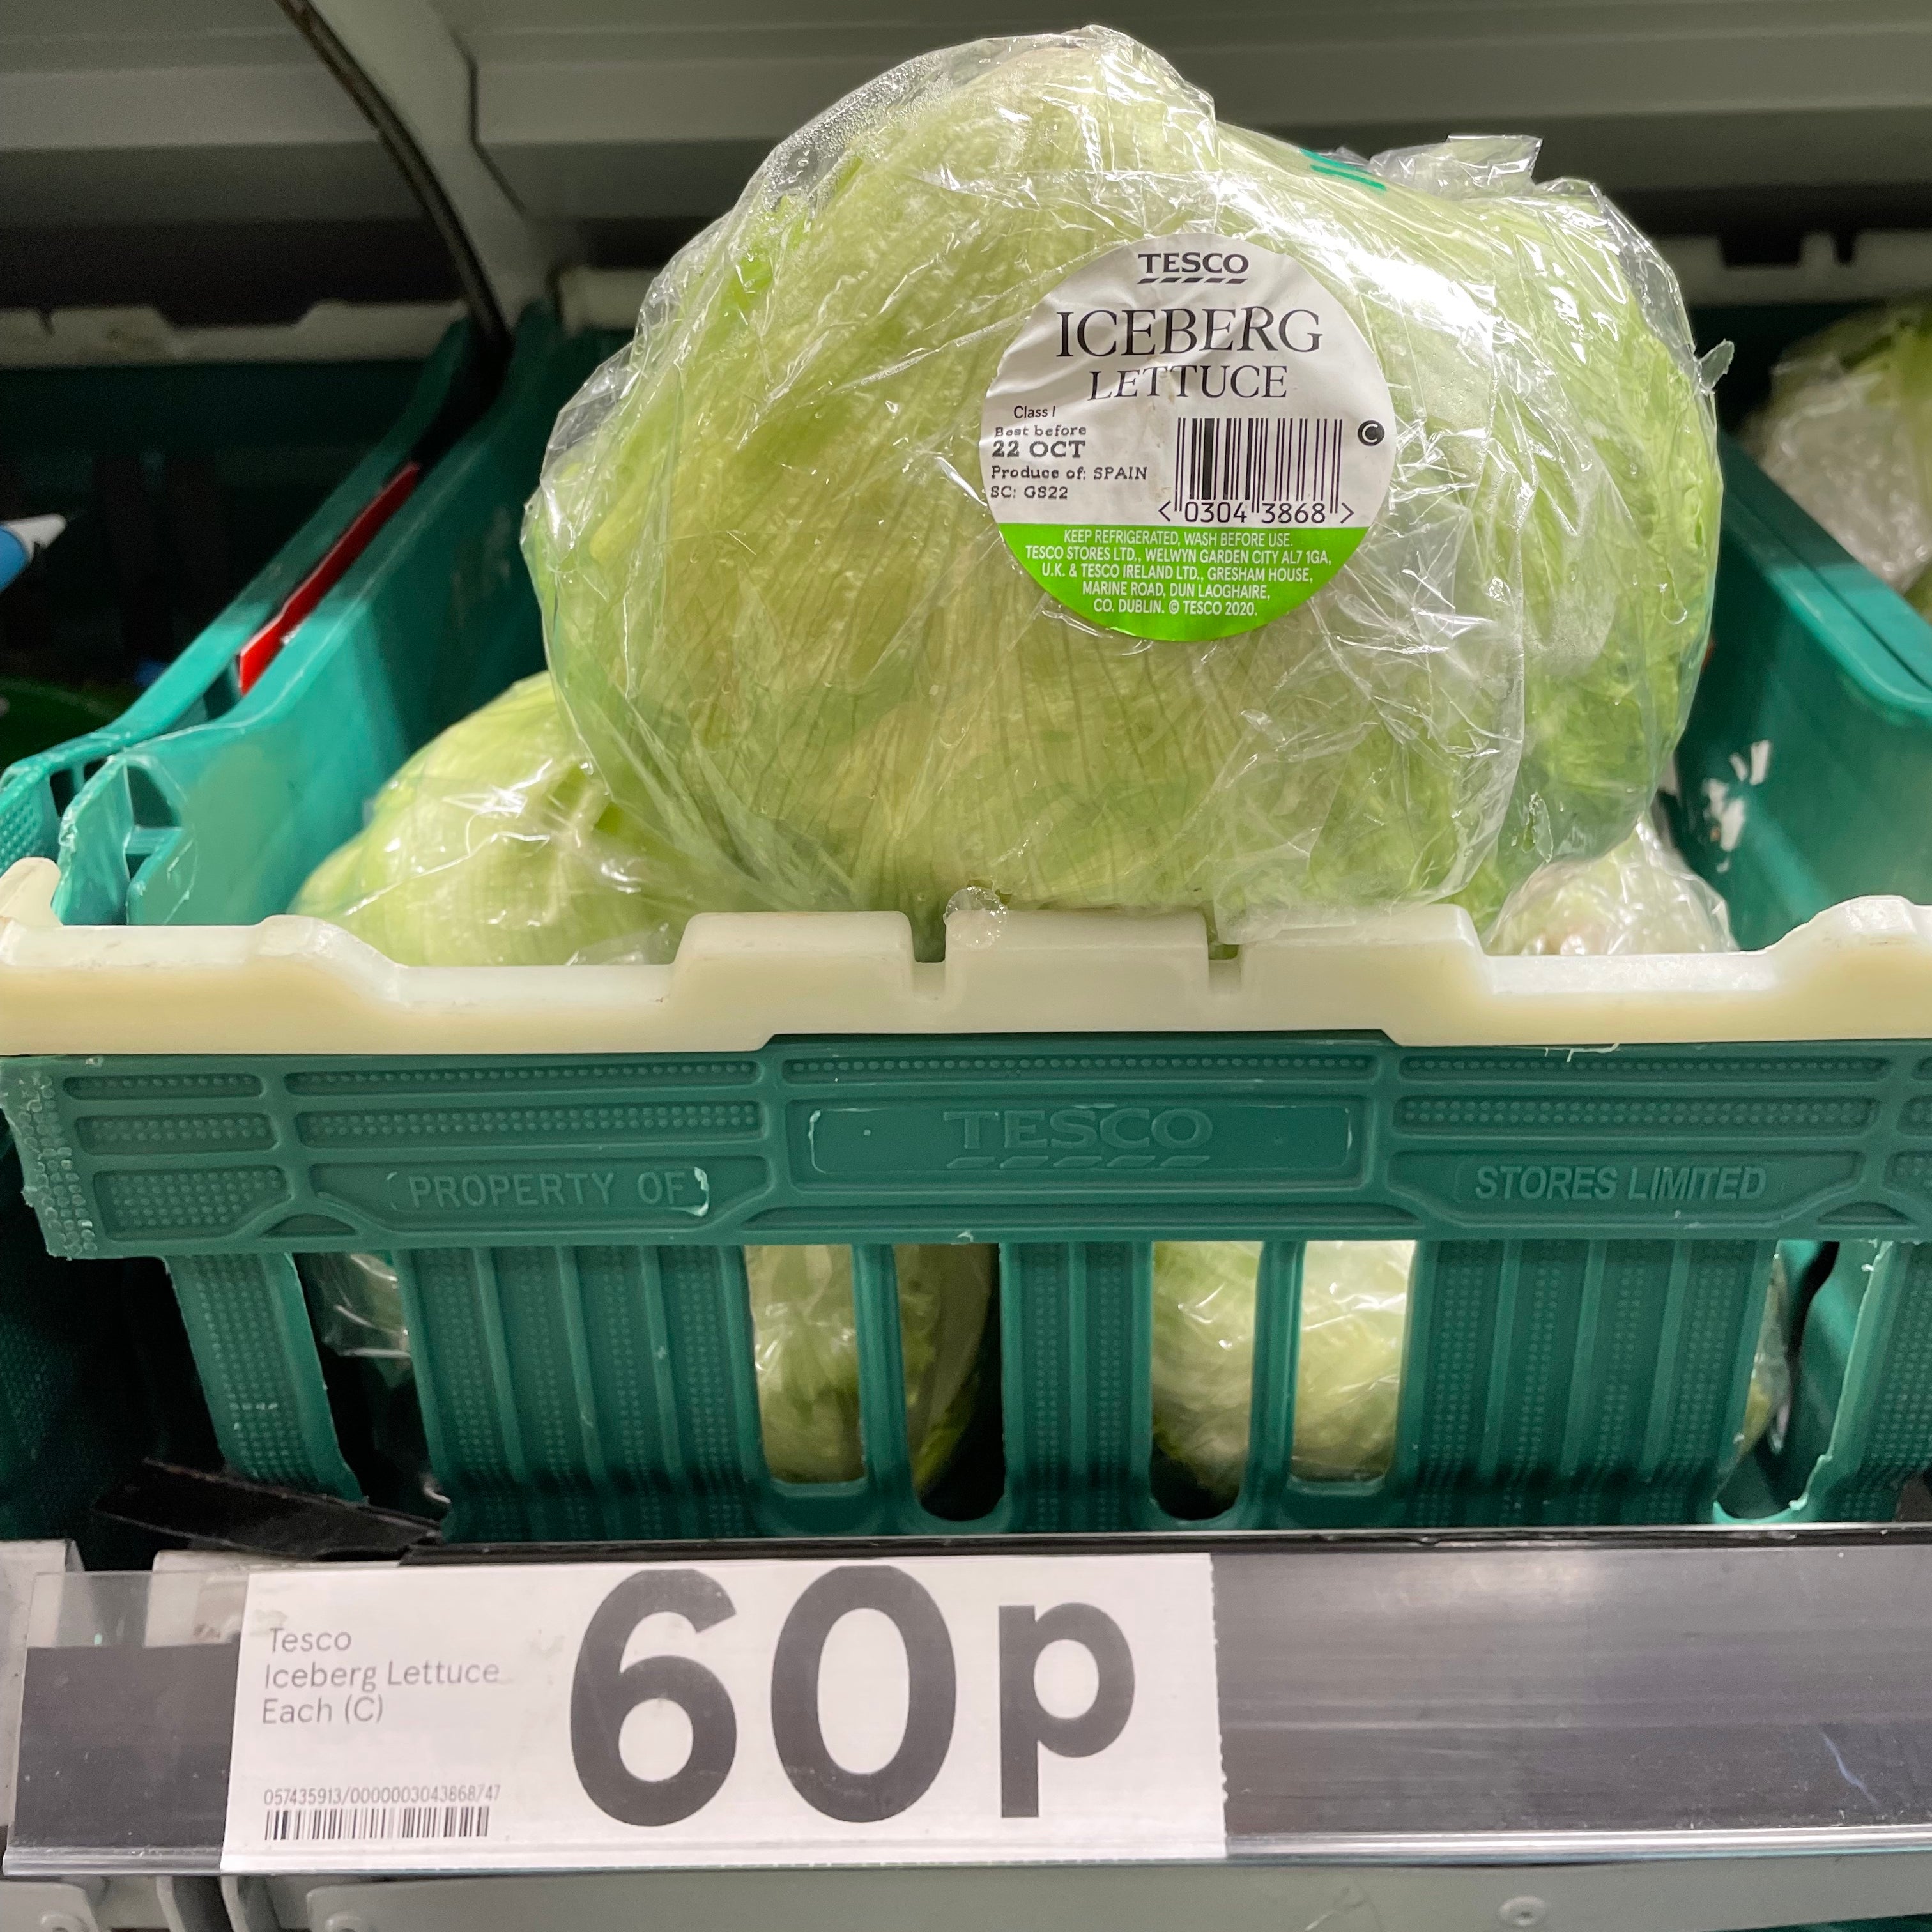 A head of lettuce at a Tesco in Scotland, UK